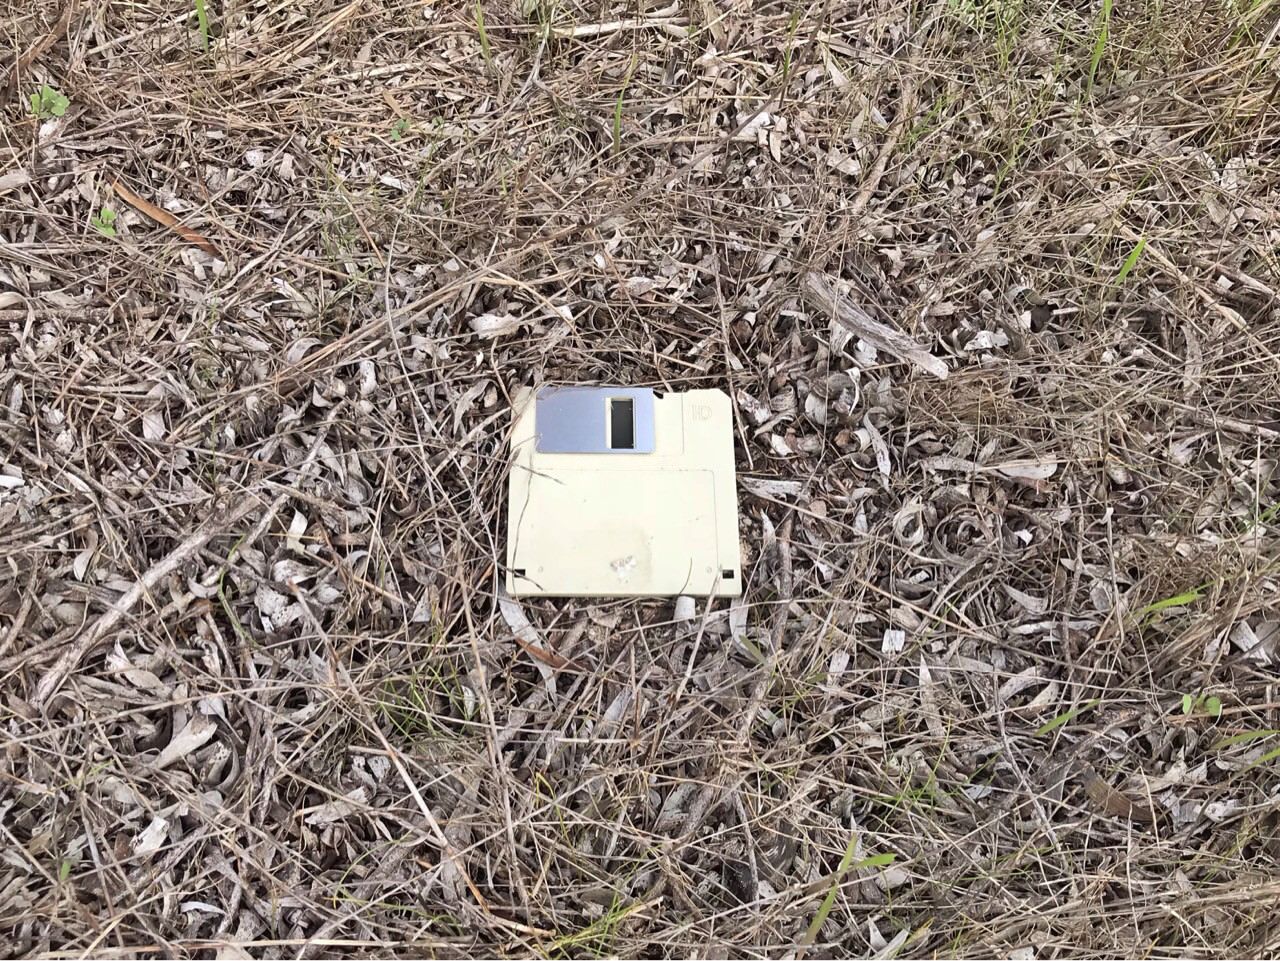 Was hiking in the bush and found this - when random save points appear something terrible is about to happen, right...?